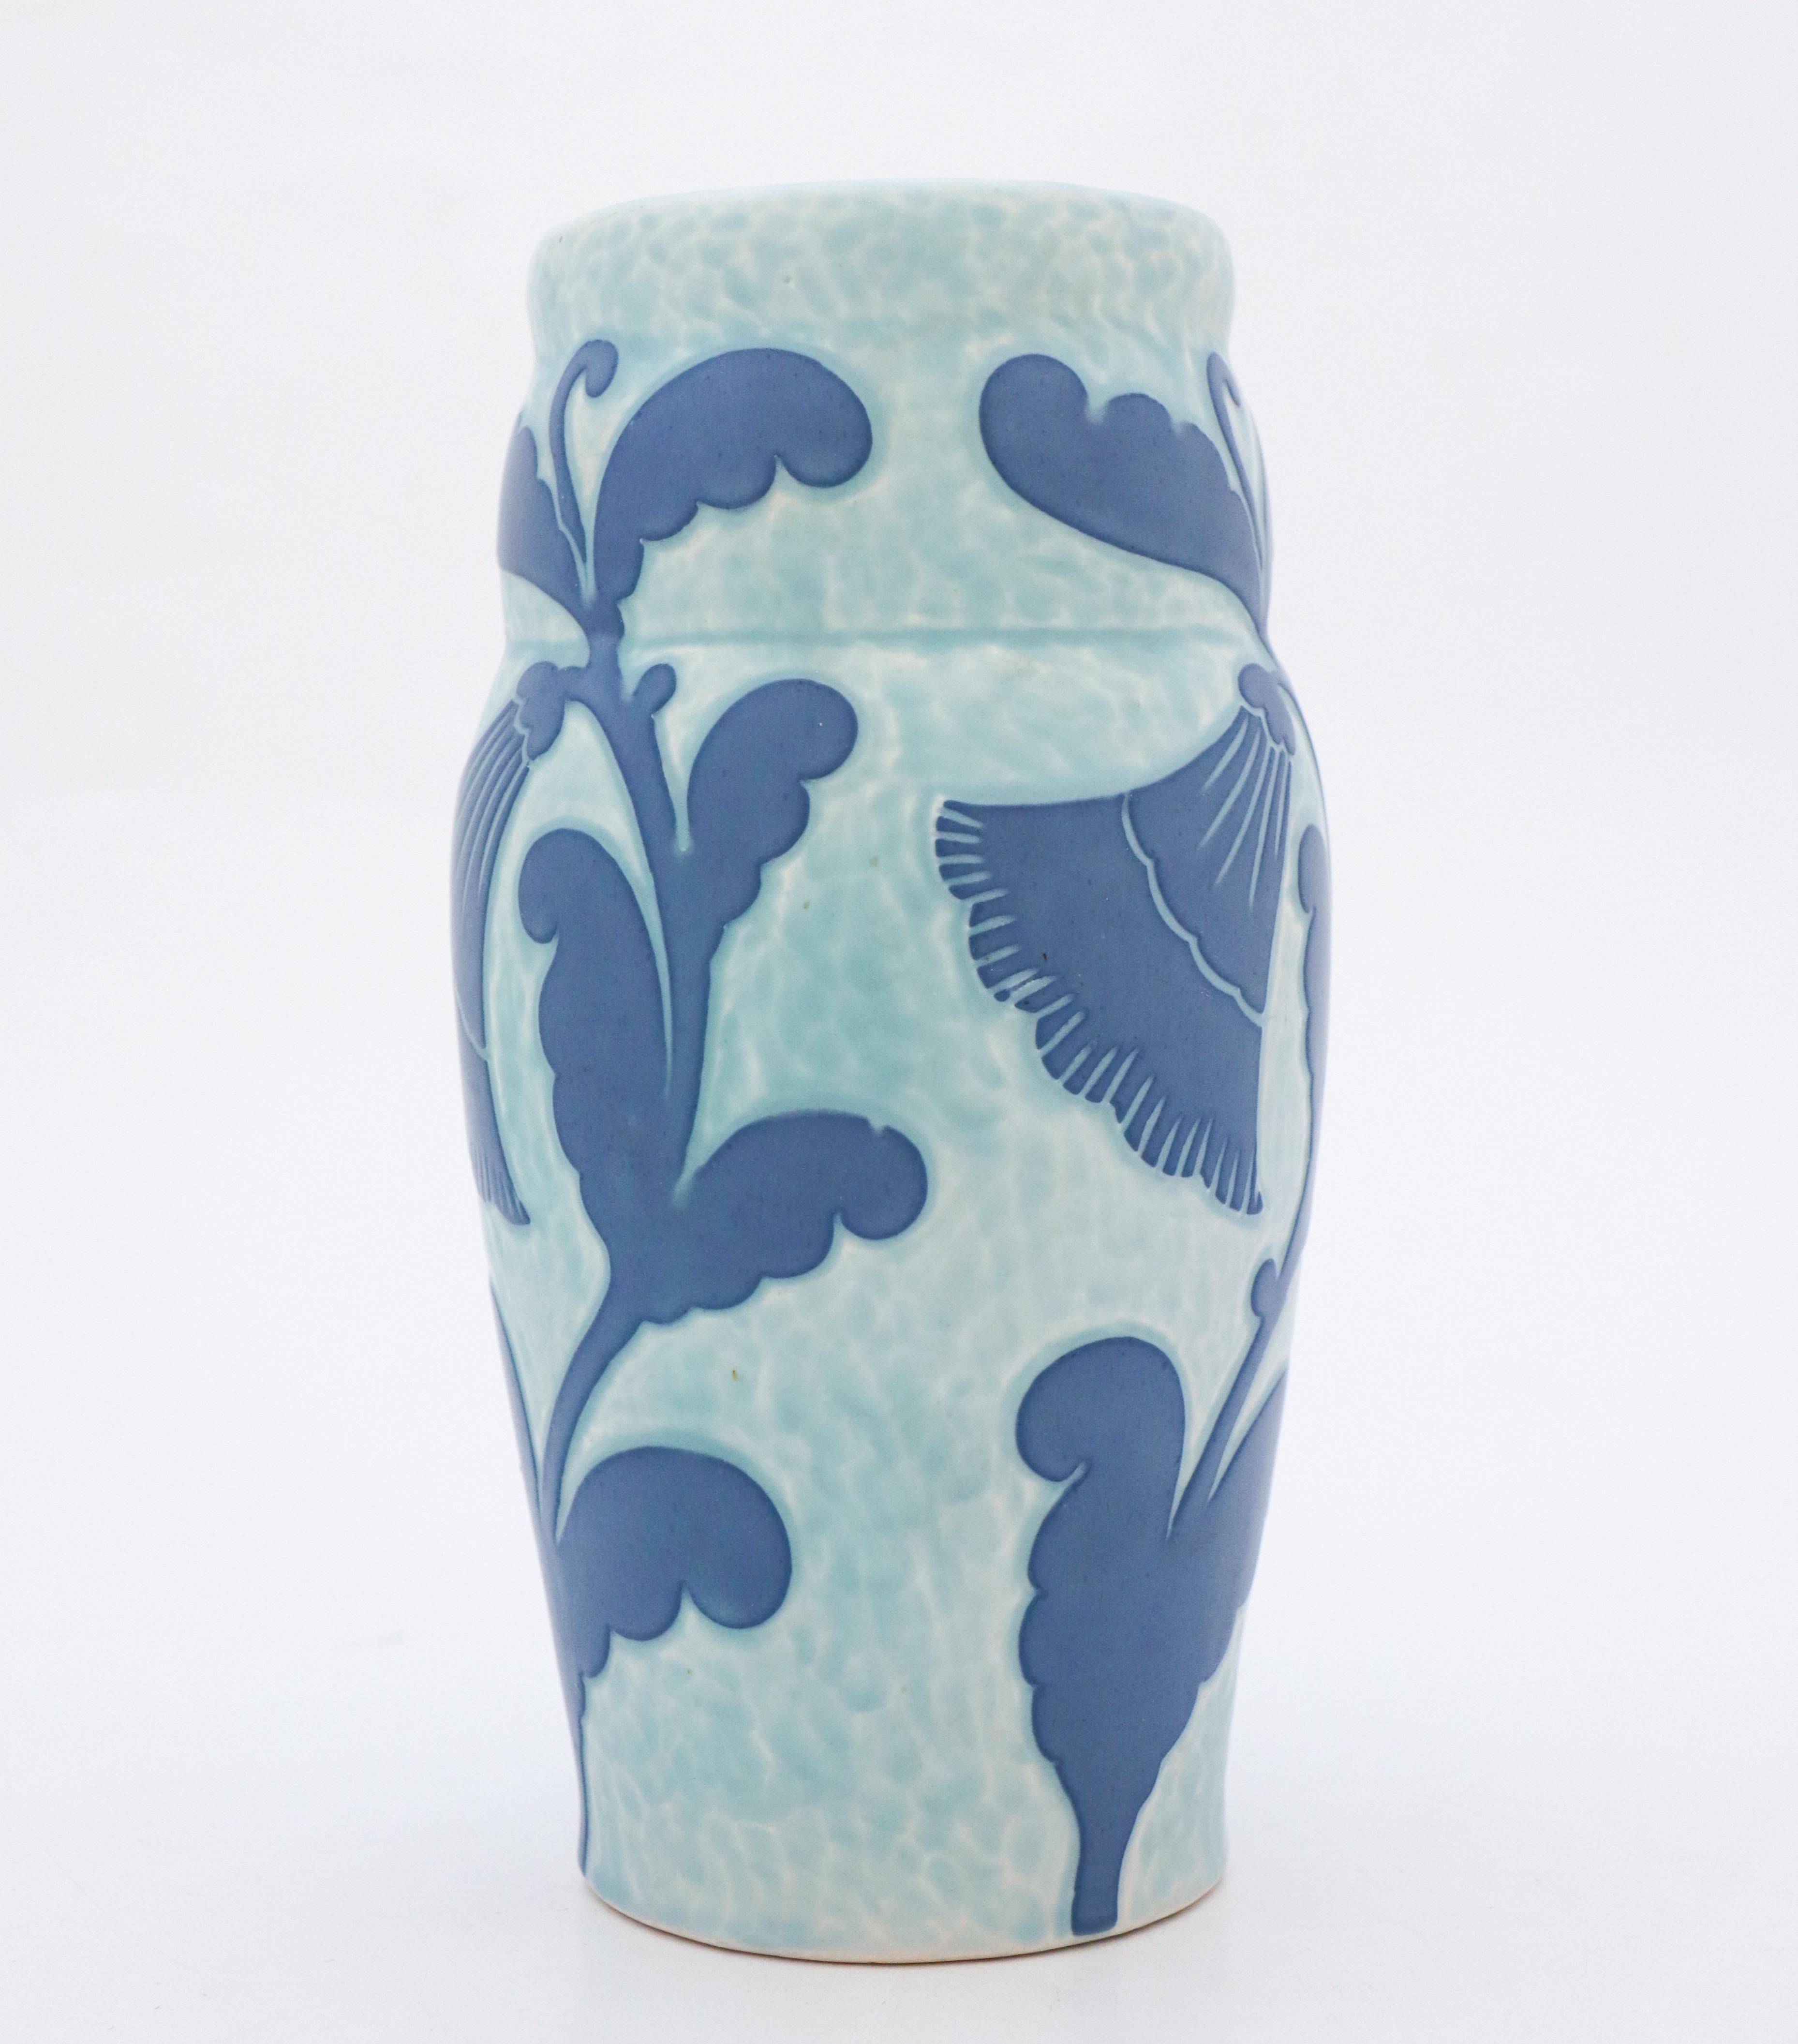 A ceramic vas in lovely art nouveau style by Josef Ekberg at Gustavsberg in 1921. The vase is 21.5 cm high and in very good condition except from some minor marks. 